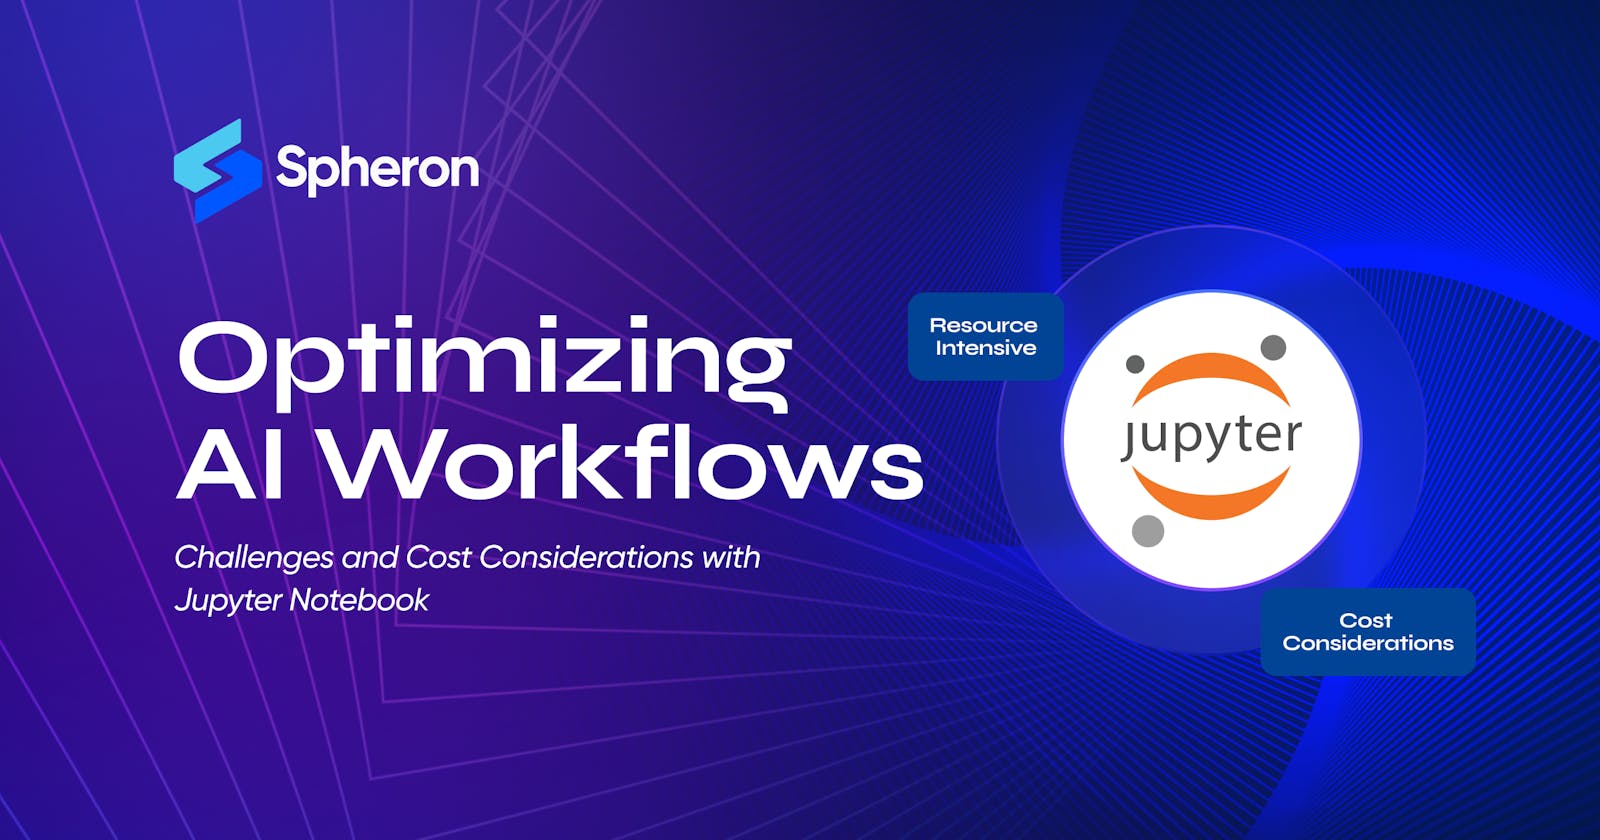 Optimizing AI Workflows: Challenges and Cost Considerations with Jupyter Notebook